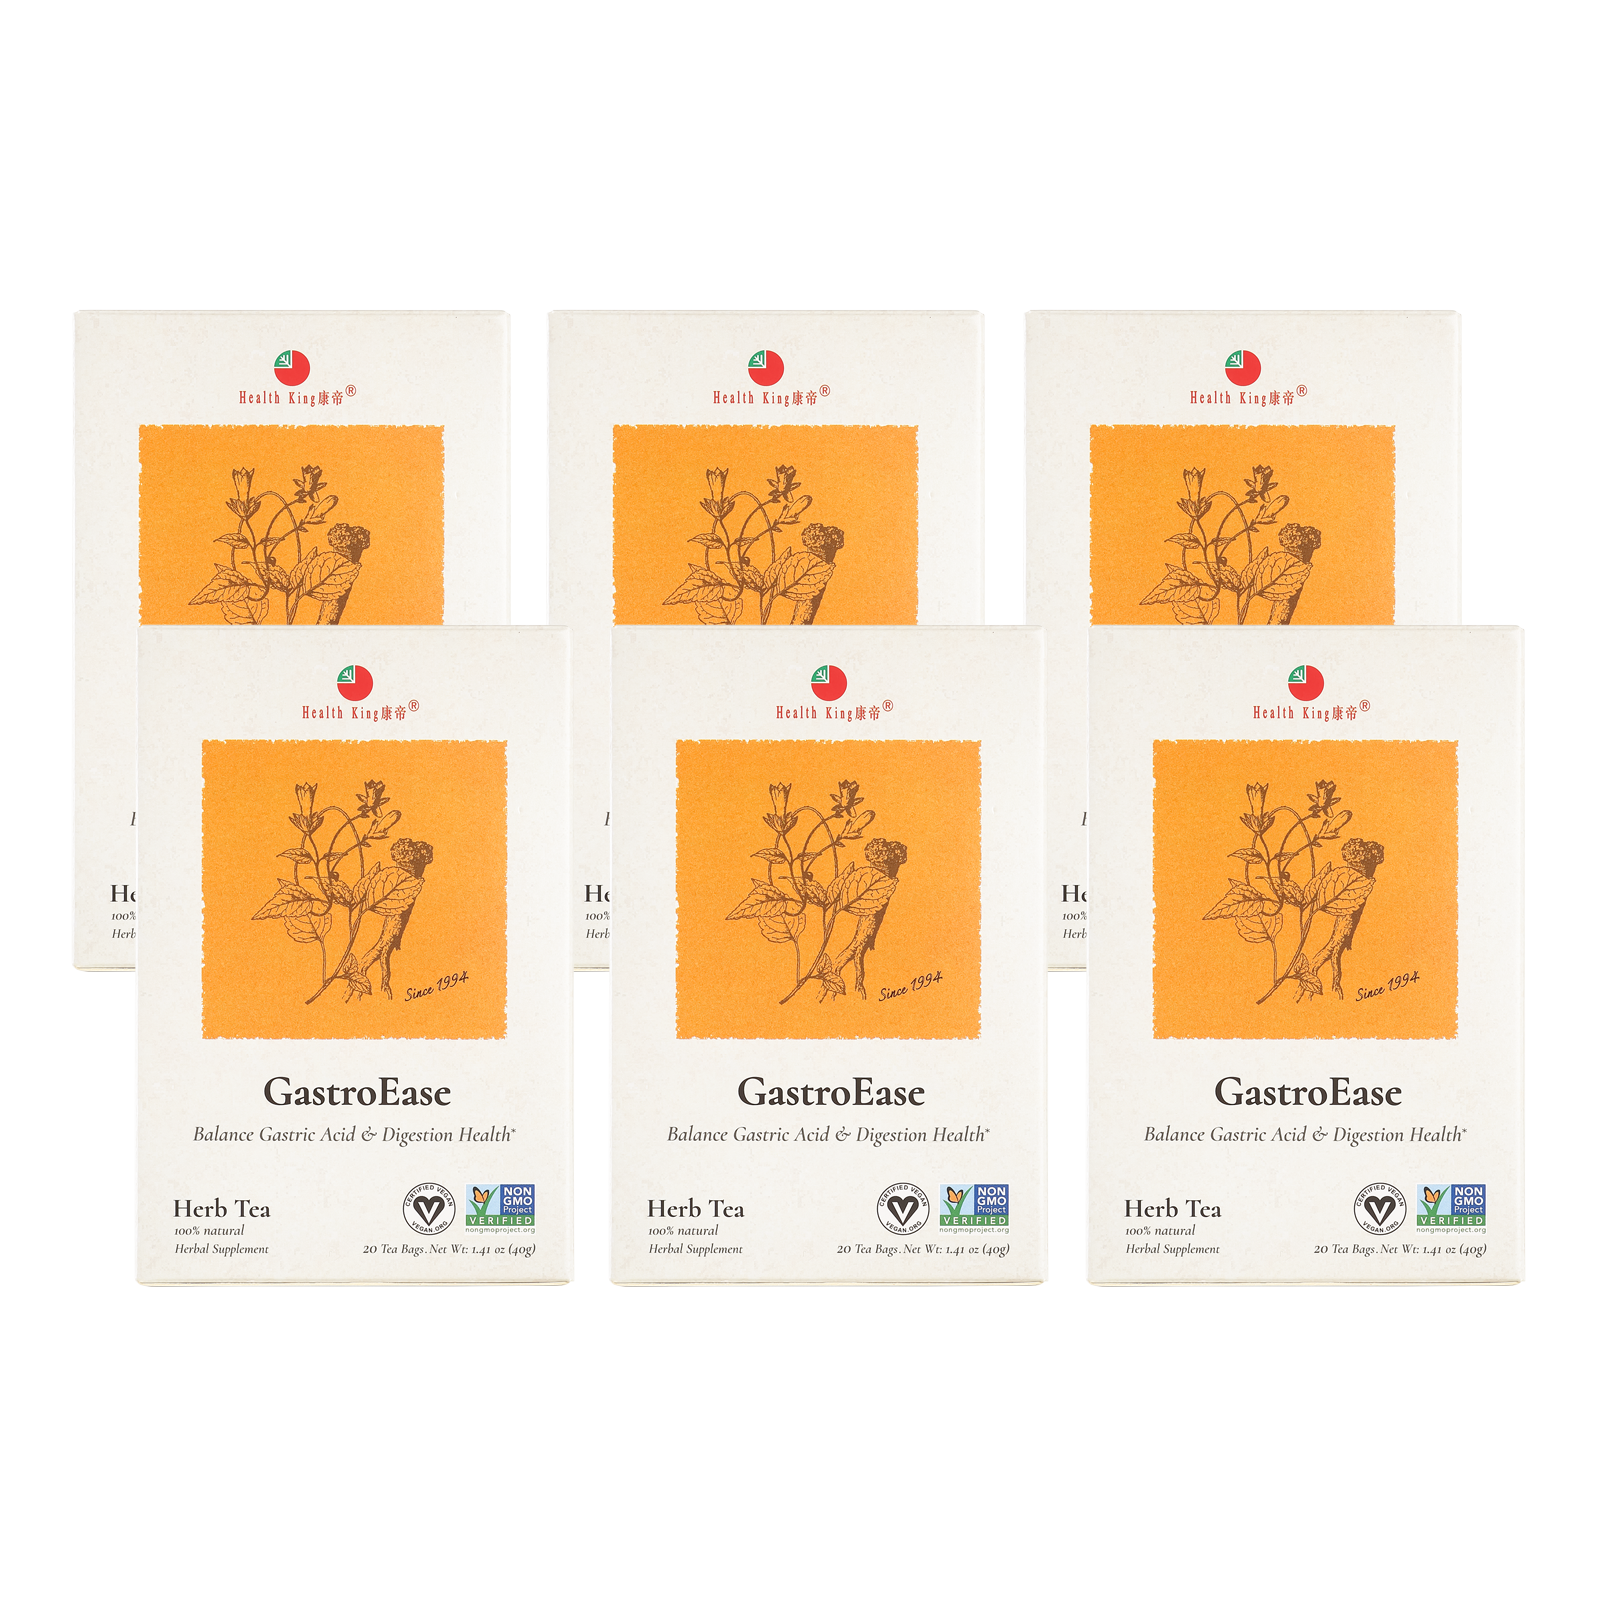 GastroEase digestive support herbal tea in individual sachets on white background